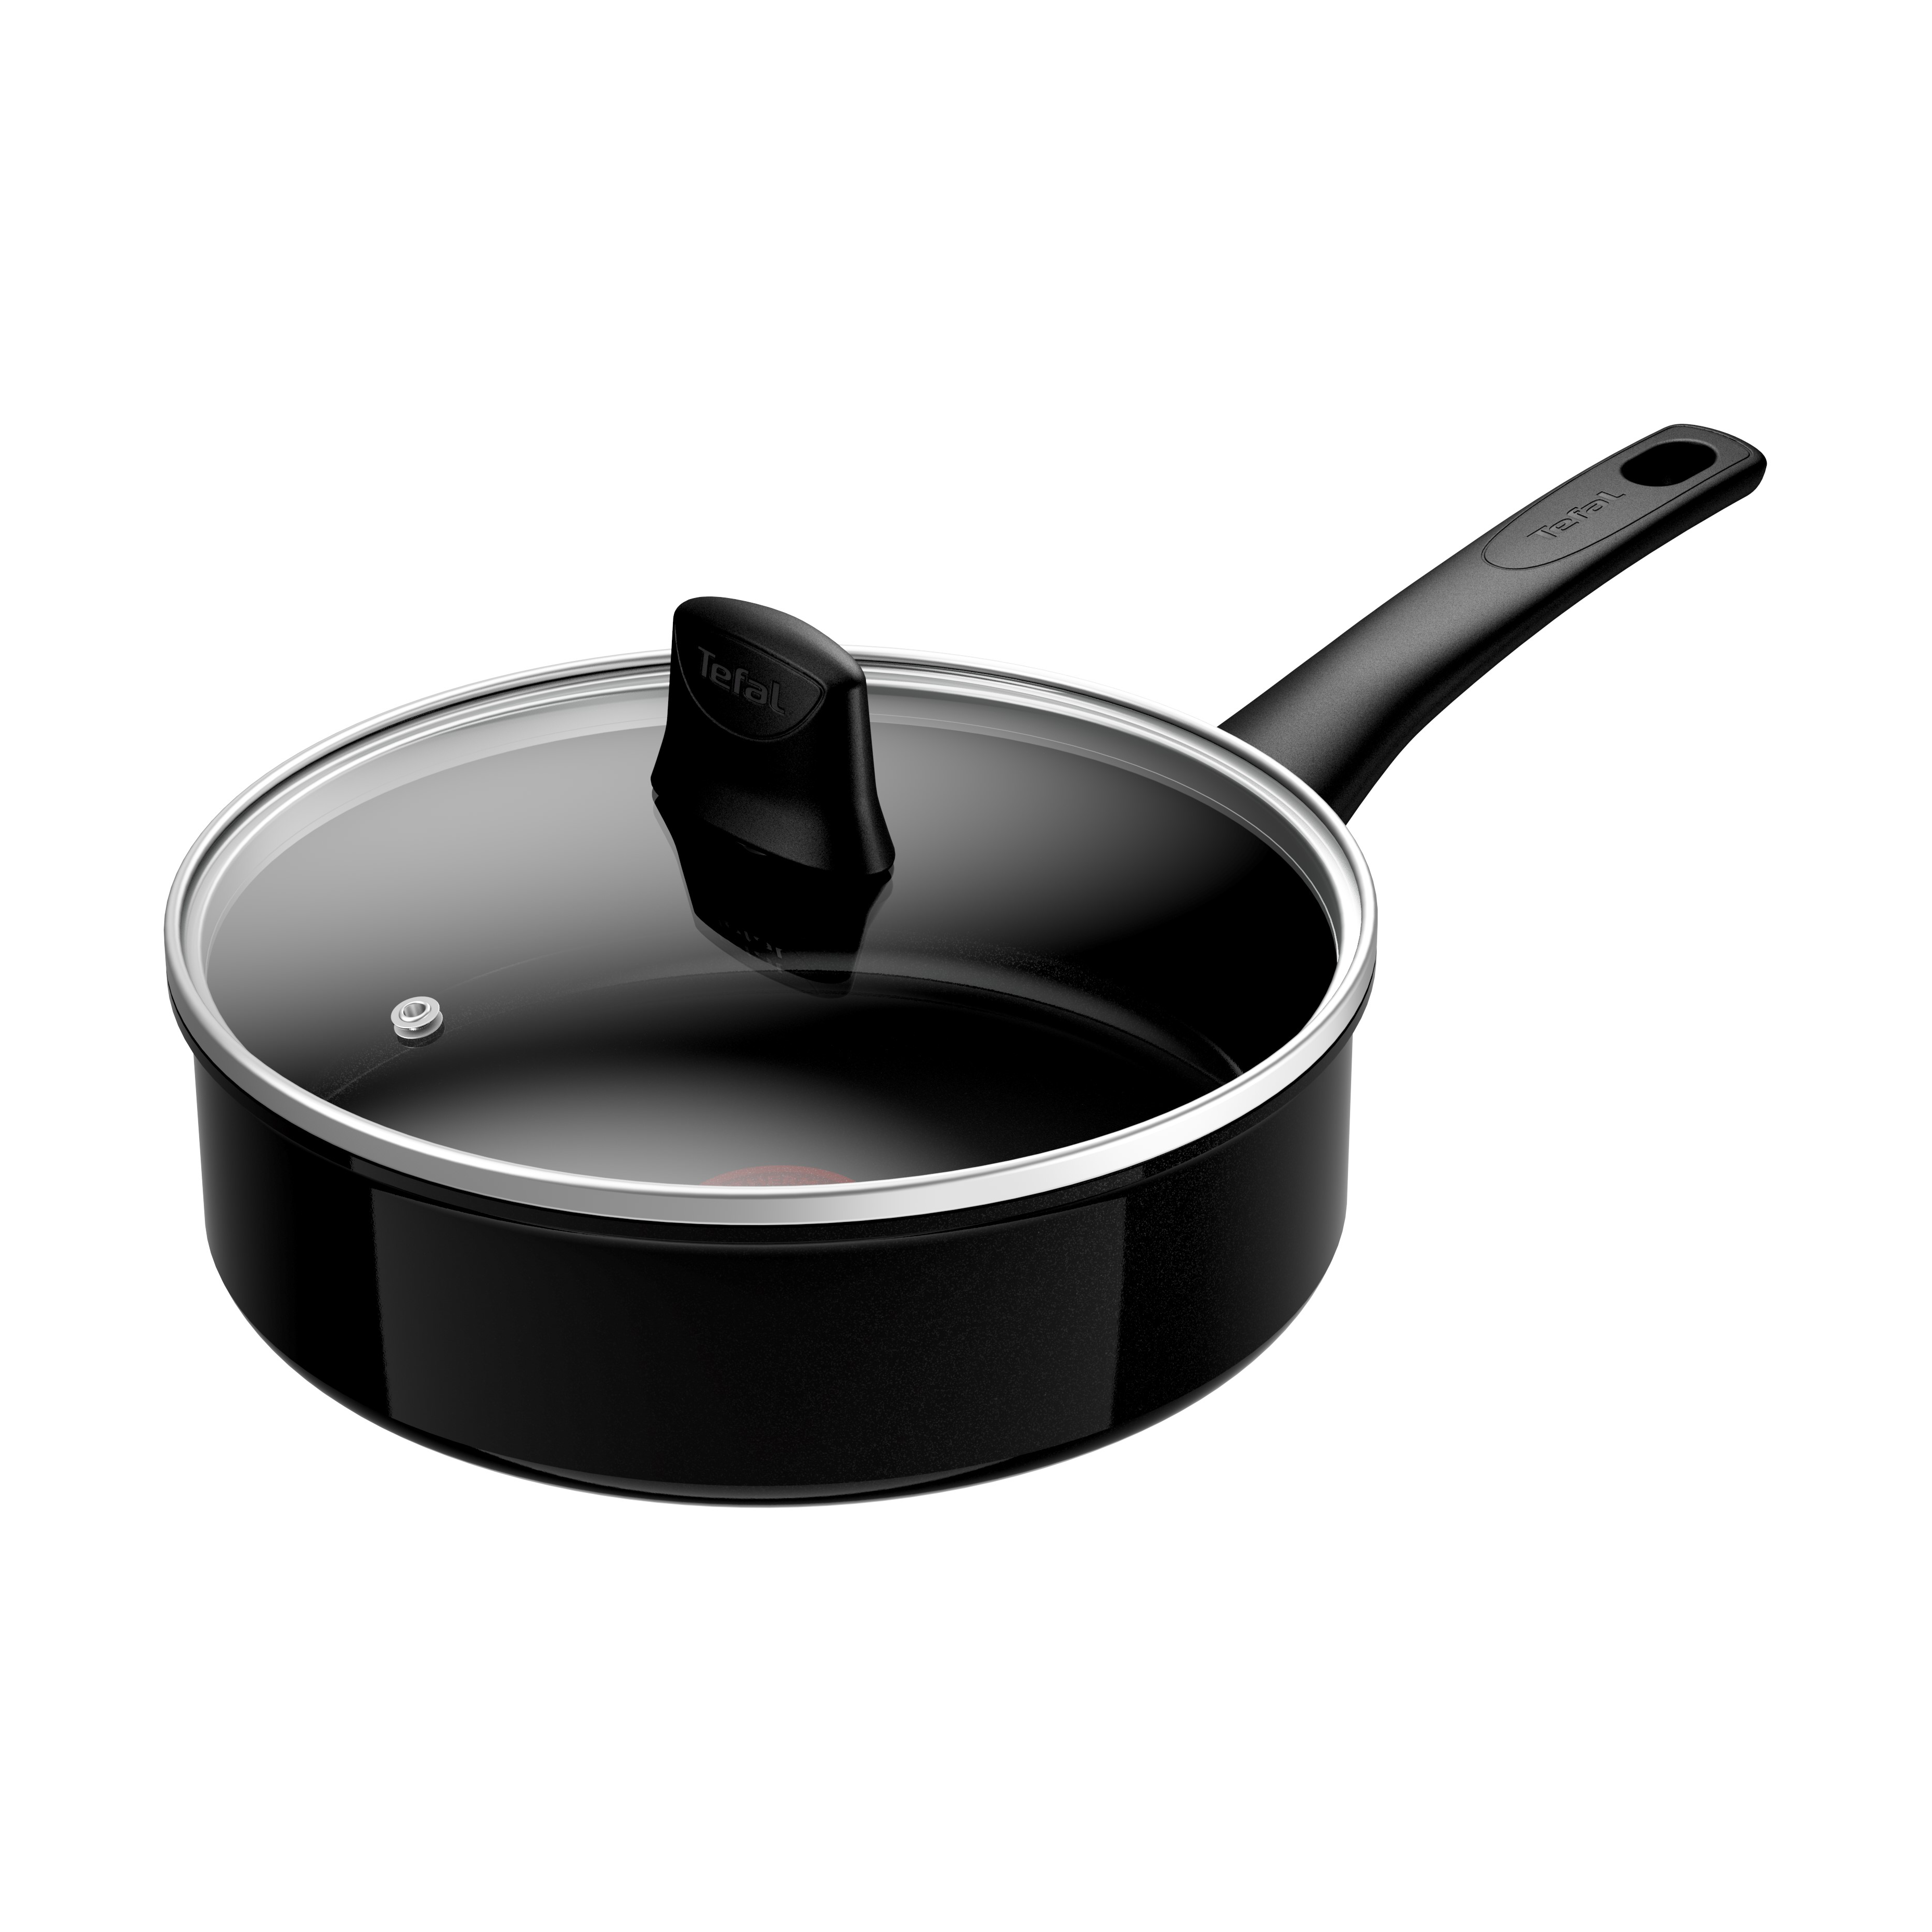 https://www.nordicnest.com/assets/blobs/tefal-renew-on-sauce-pan-with-lid-254-cm-black/587226-01_1_ProductImageMain-38b75cb446.png